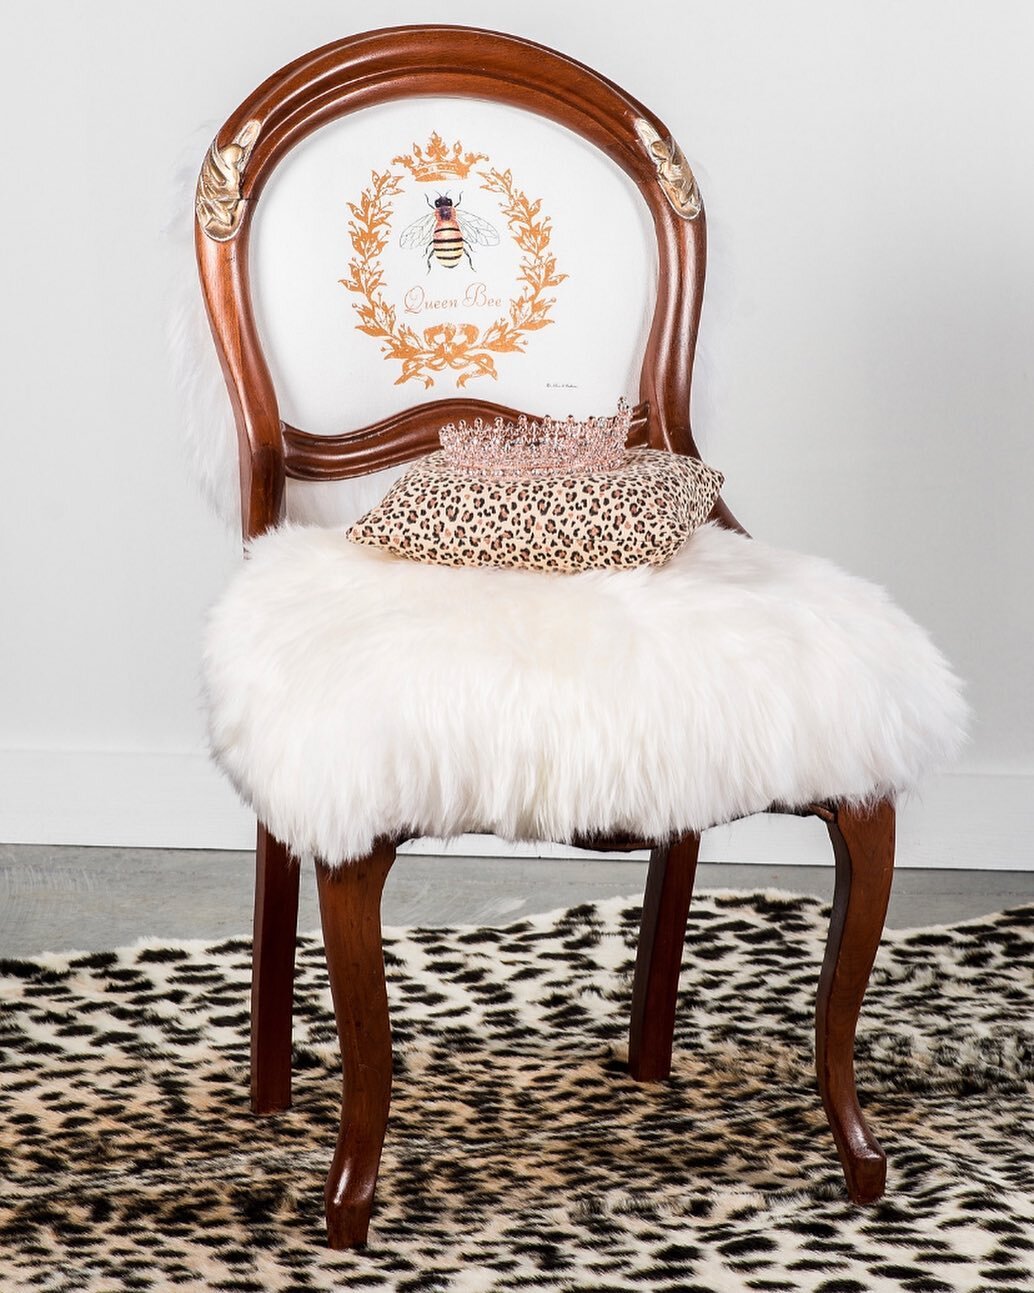 Who&rsquo;s the Queen Bee in Your family? This cute Queenie chair comes complete with a crown and pillow.  Give your sweetheart something she will love forever! 2 Available at Marquee Asheville ❤️❤️❤️#queenbee, #valentinegifts, #chairs,  #crown, #mar